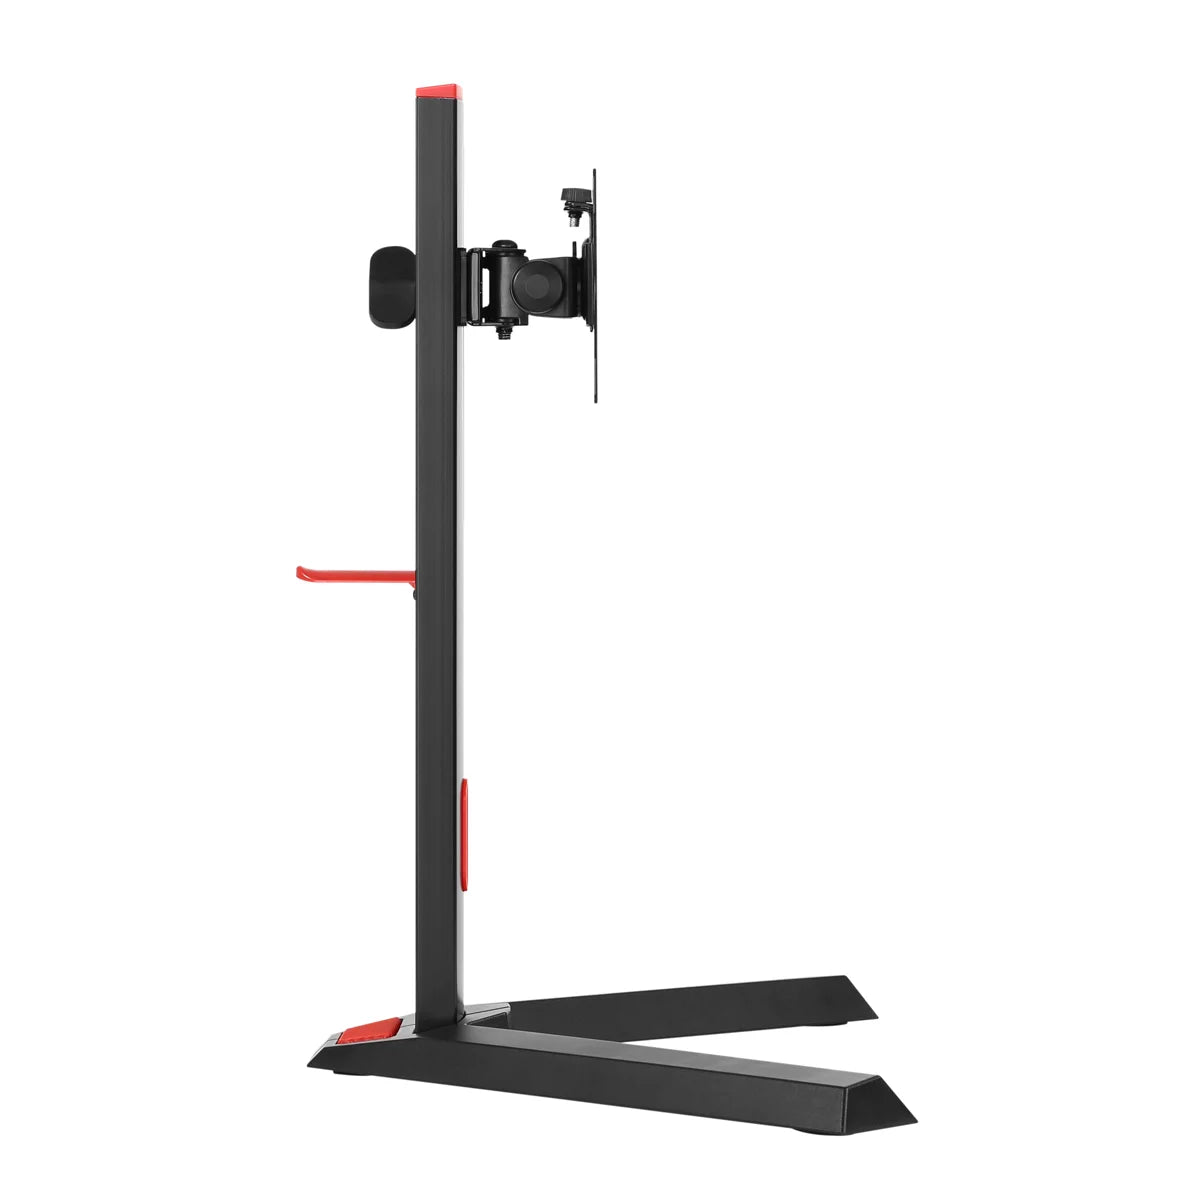 SkillTech - SH 32 T01 - Single Screen Freestanding Pro Gaming Monitor Arm Stand With Headphone Holder